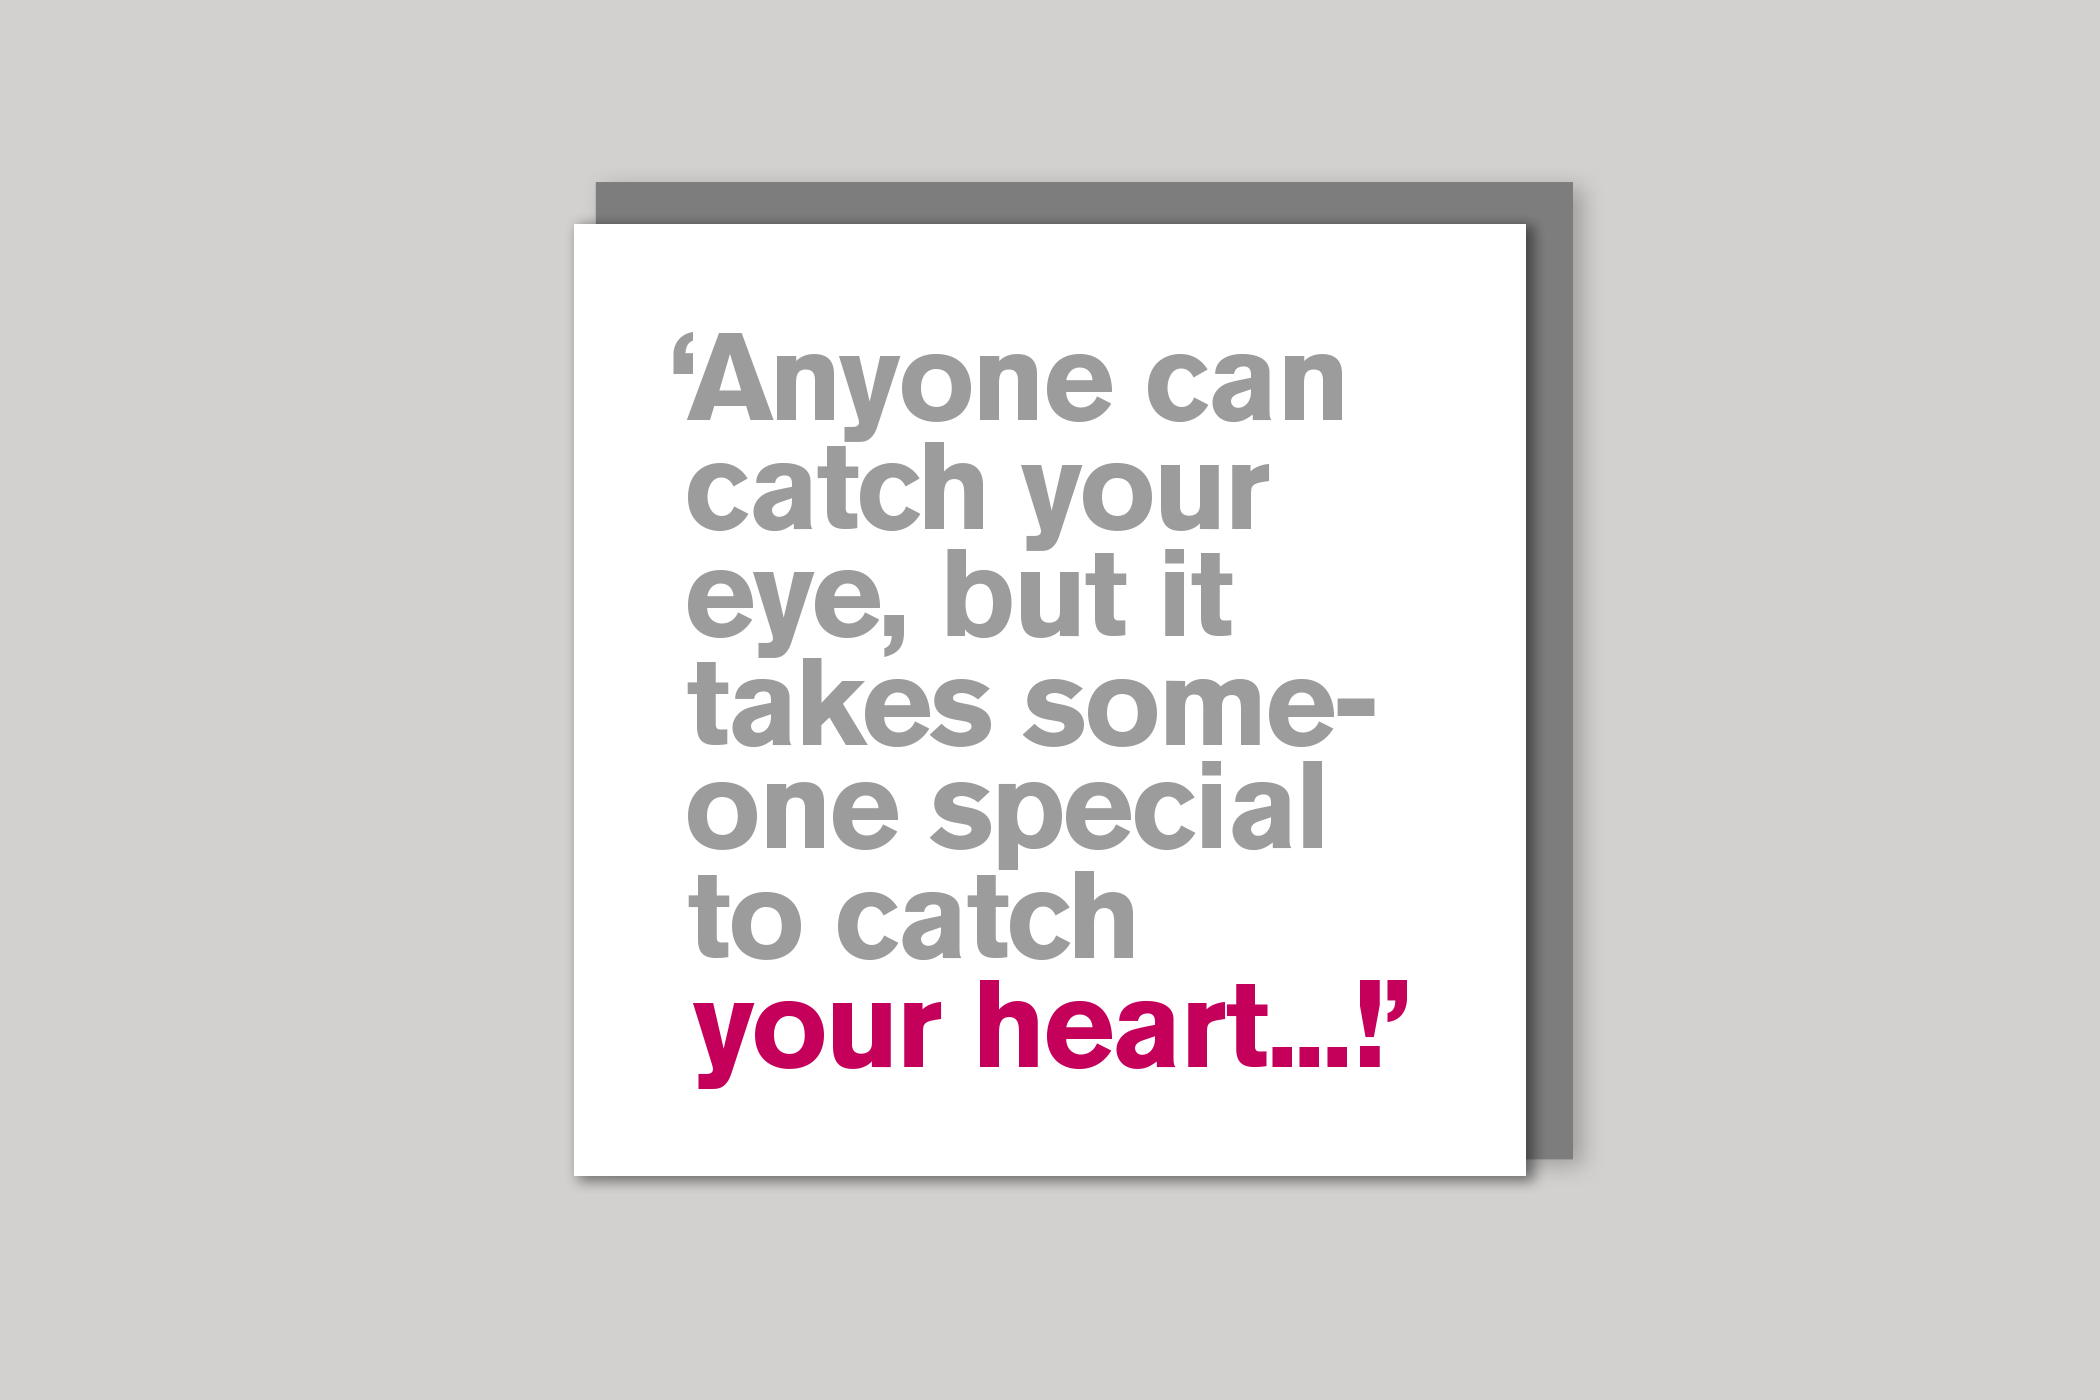 Catch Your Heart rngagement card from Lyric range of quotation cards by Icon, back page.